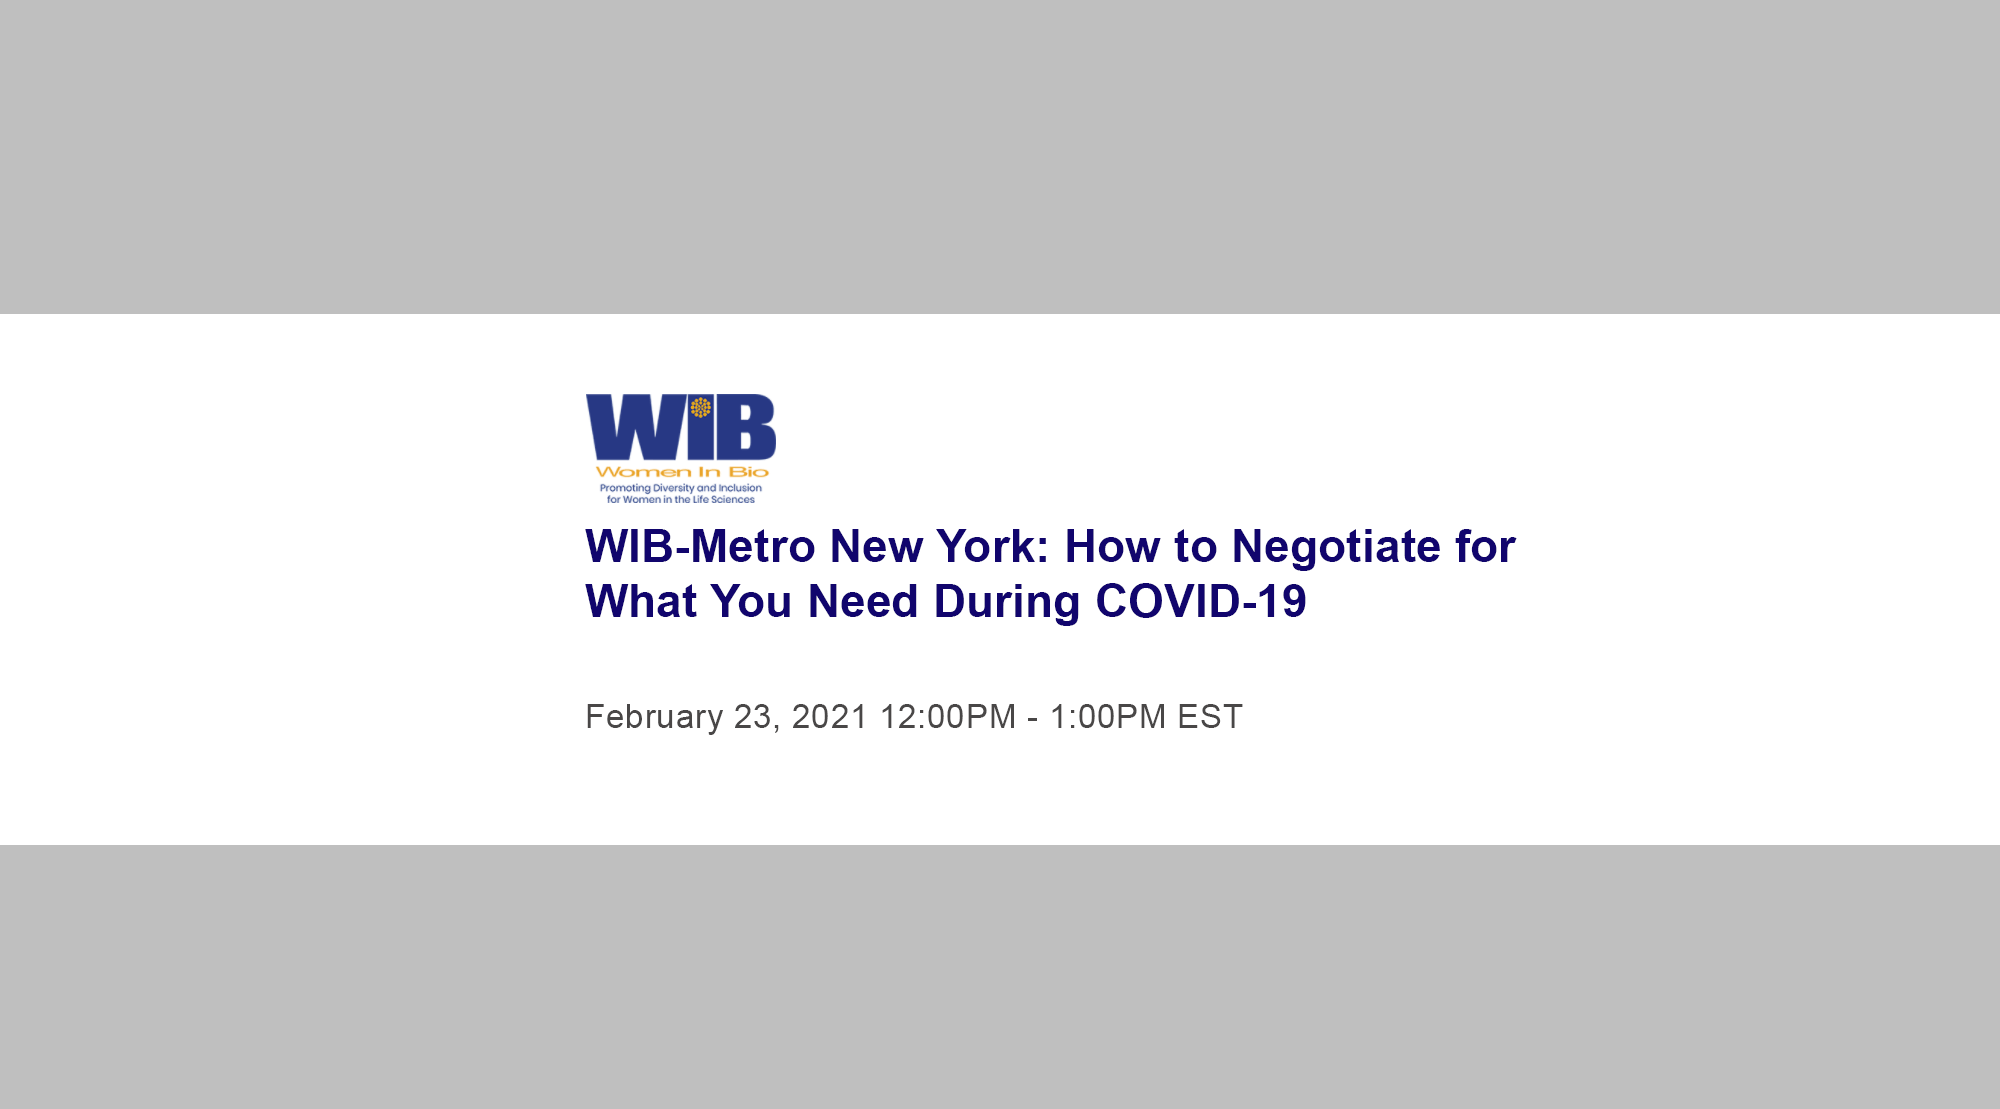 WIB-Metro New York: How to Negotiate for What You Need During COVID-19